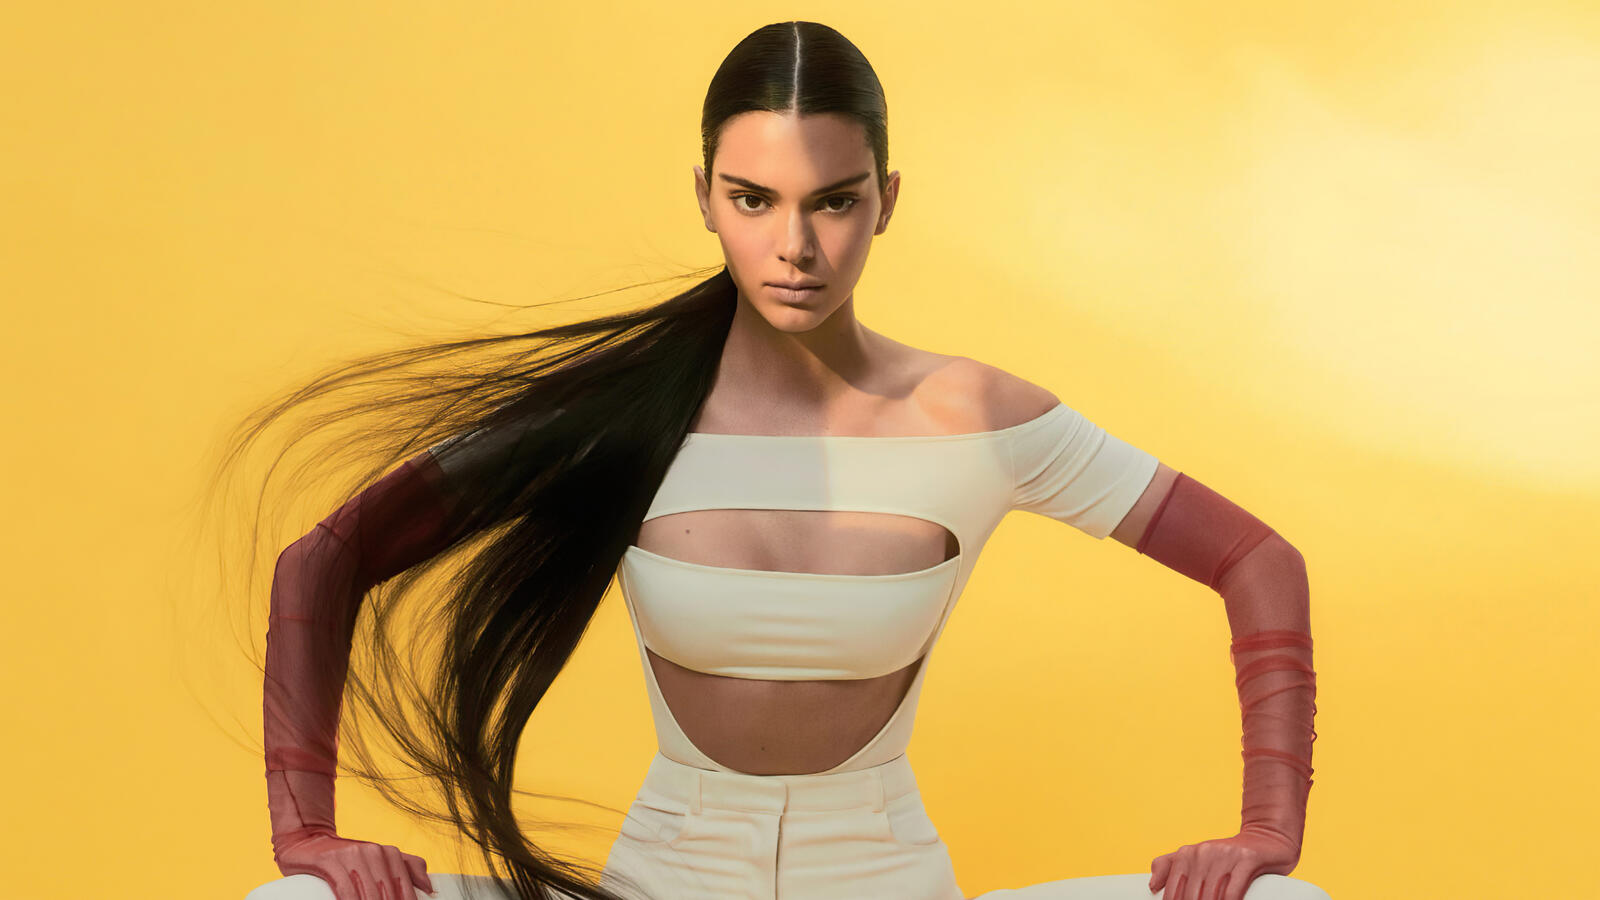 Wallpapers Kendall Jenner girls yellow background on the desktop